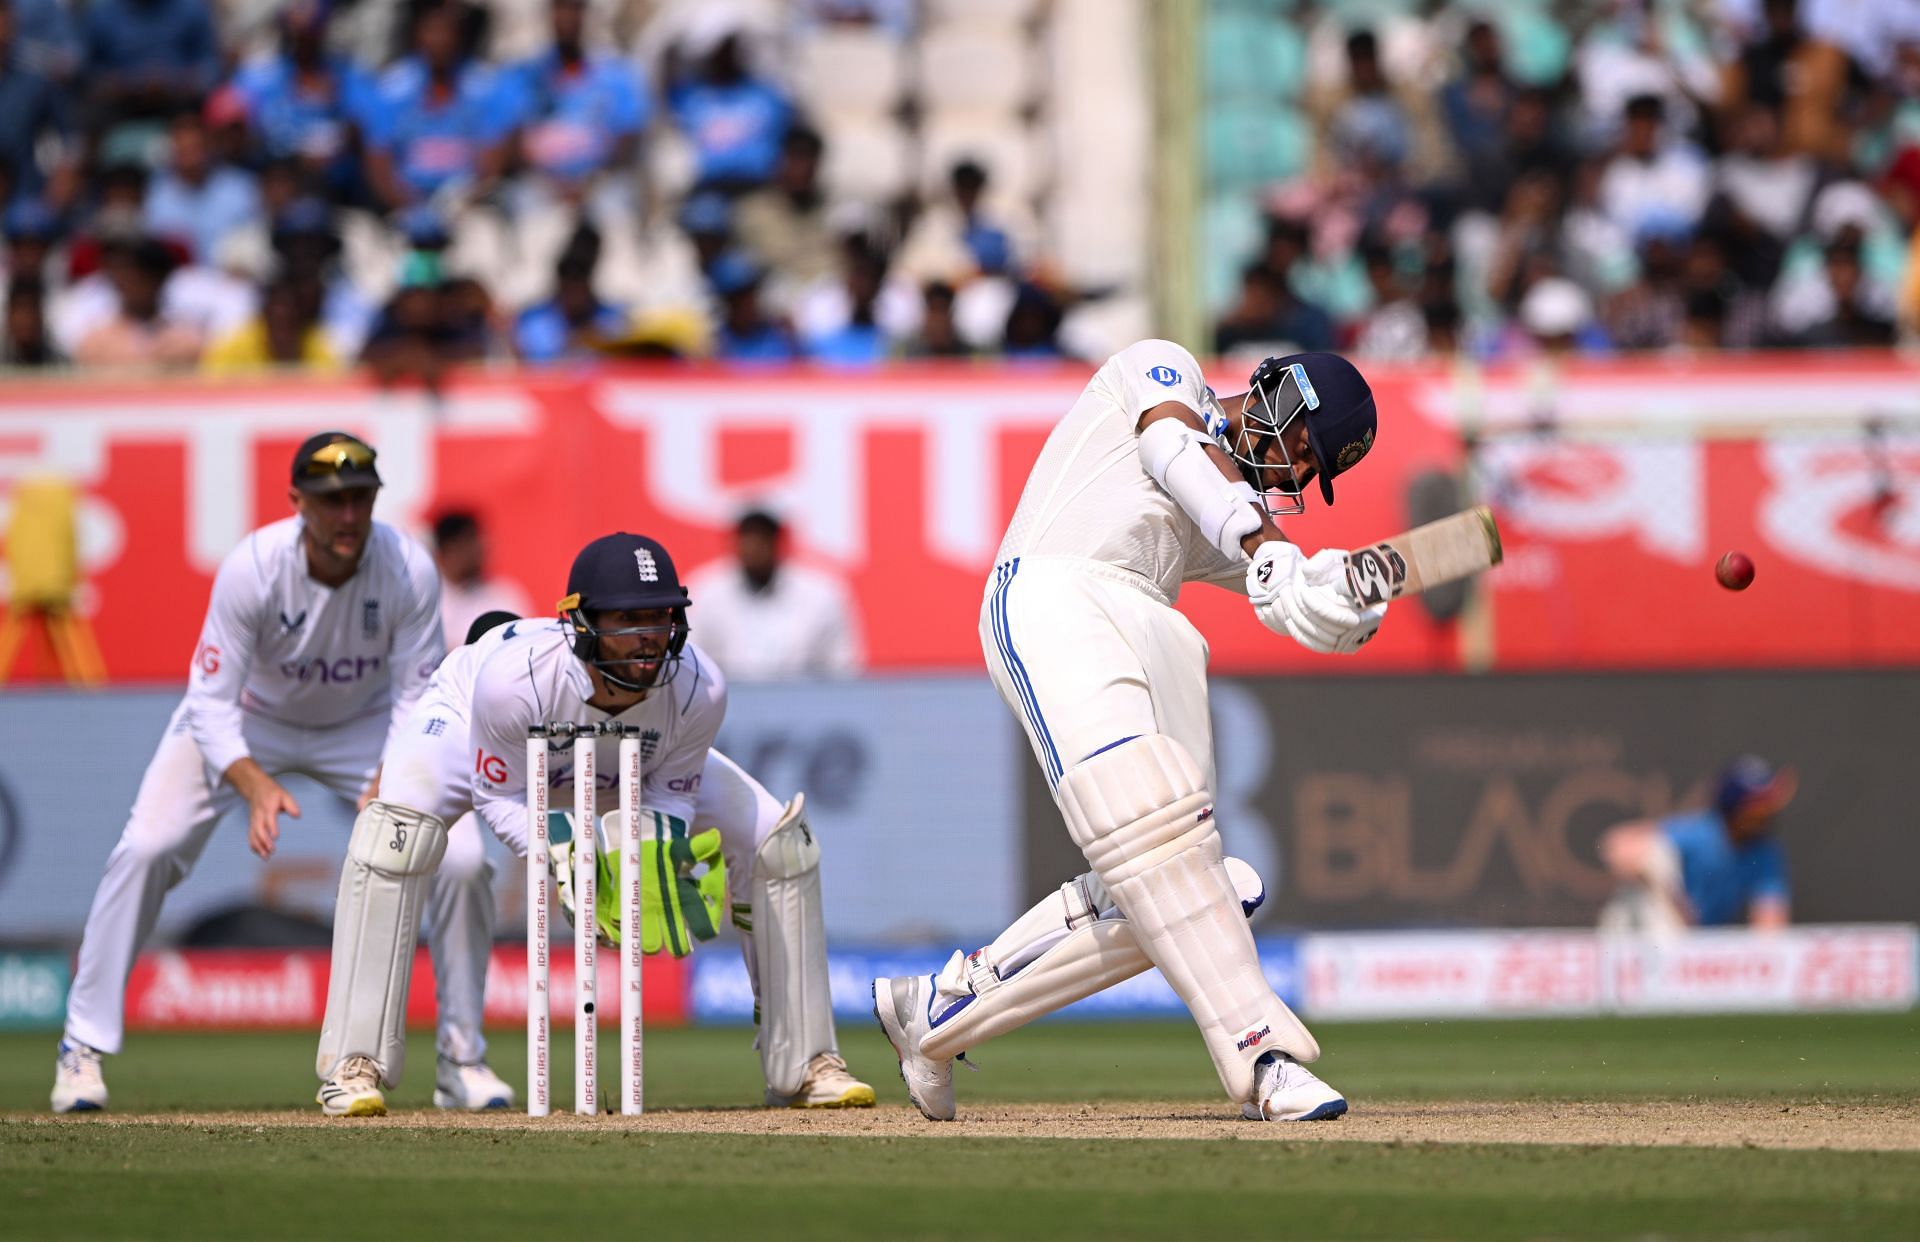 Yashasvi Jaiswal has batted brilliantly in Vizag (Image: Getty)